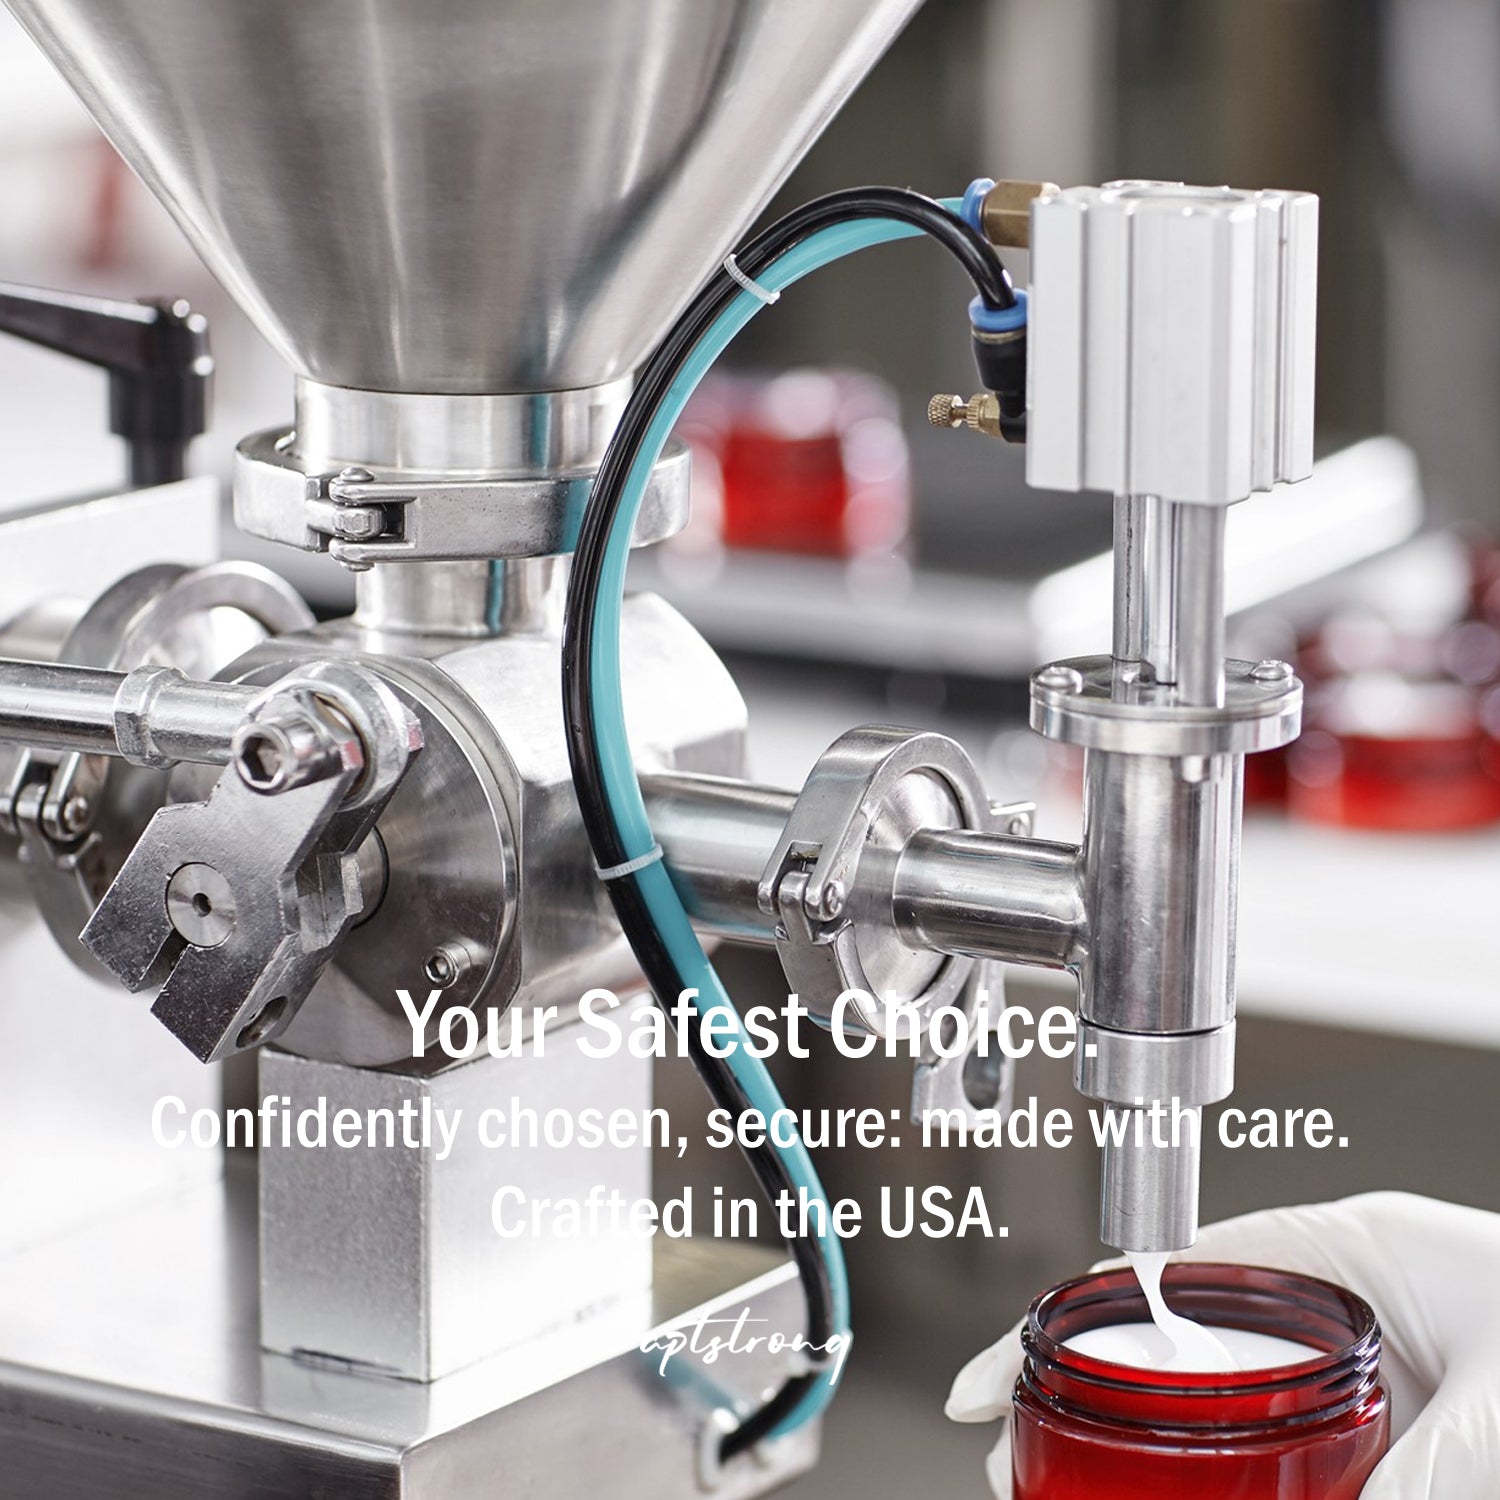 Your Safest Choice: Choose the cleanest option crafted in America using imported Honduran grains for a trusted and safe selection, available in a convenient travel size.